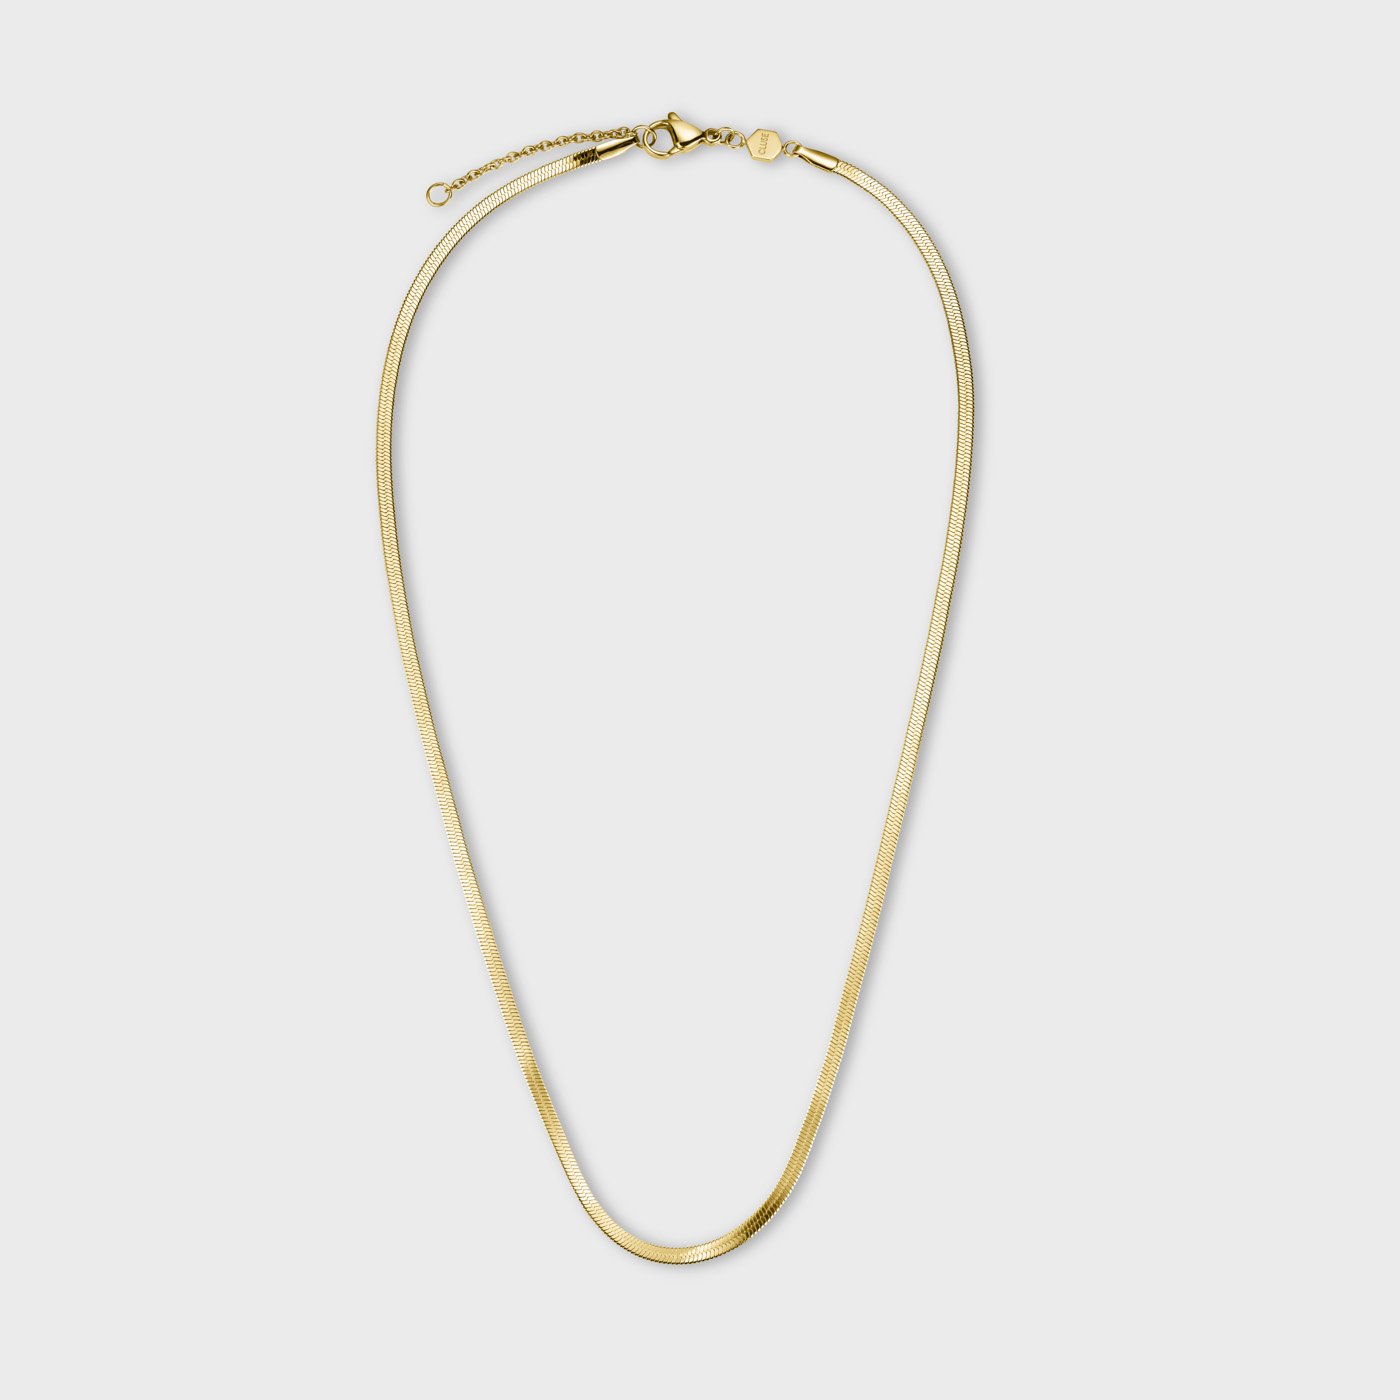 Buy SOHI Women Gold Twisted Snake Necklace Online